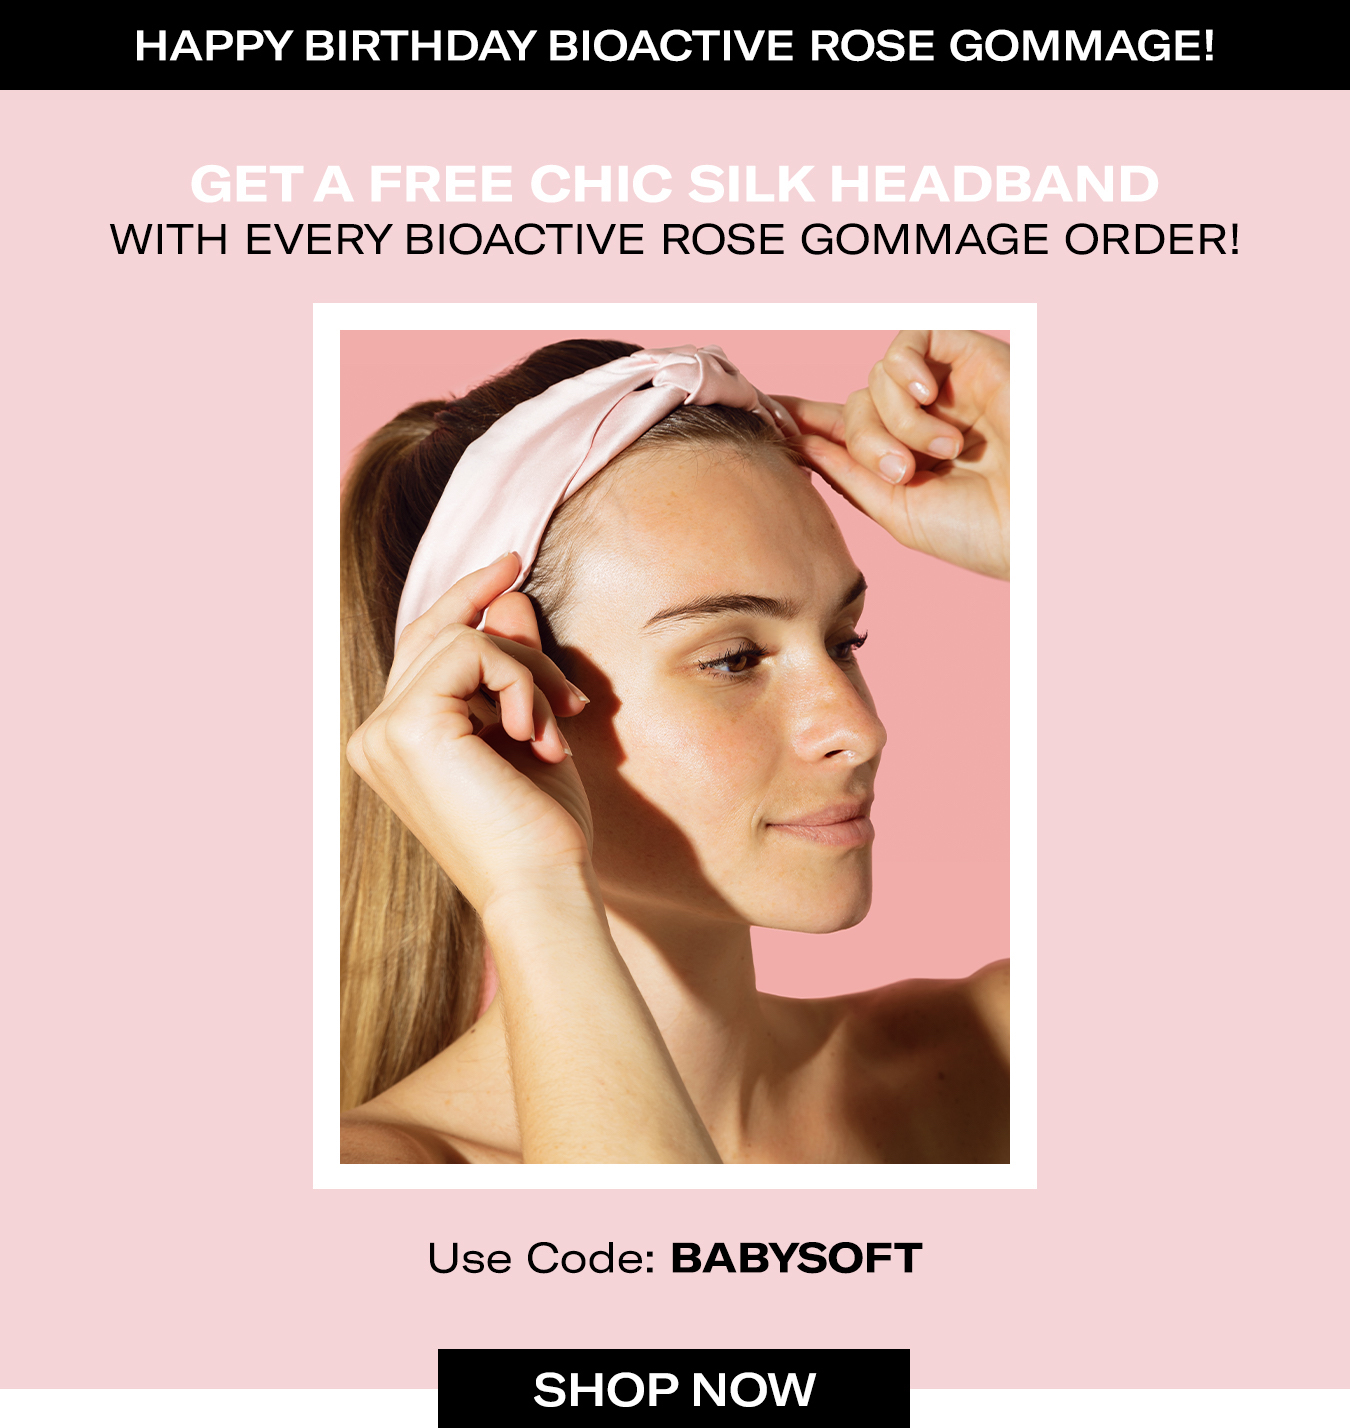 Free Chic Silk Headband With Every Bioactive Rose Gommage Order!